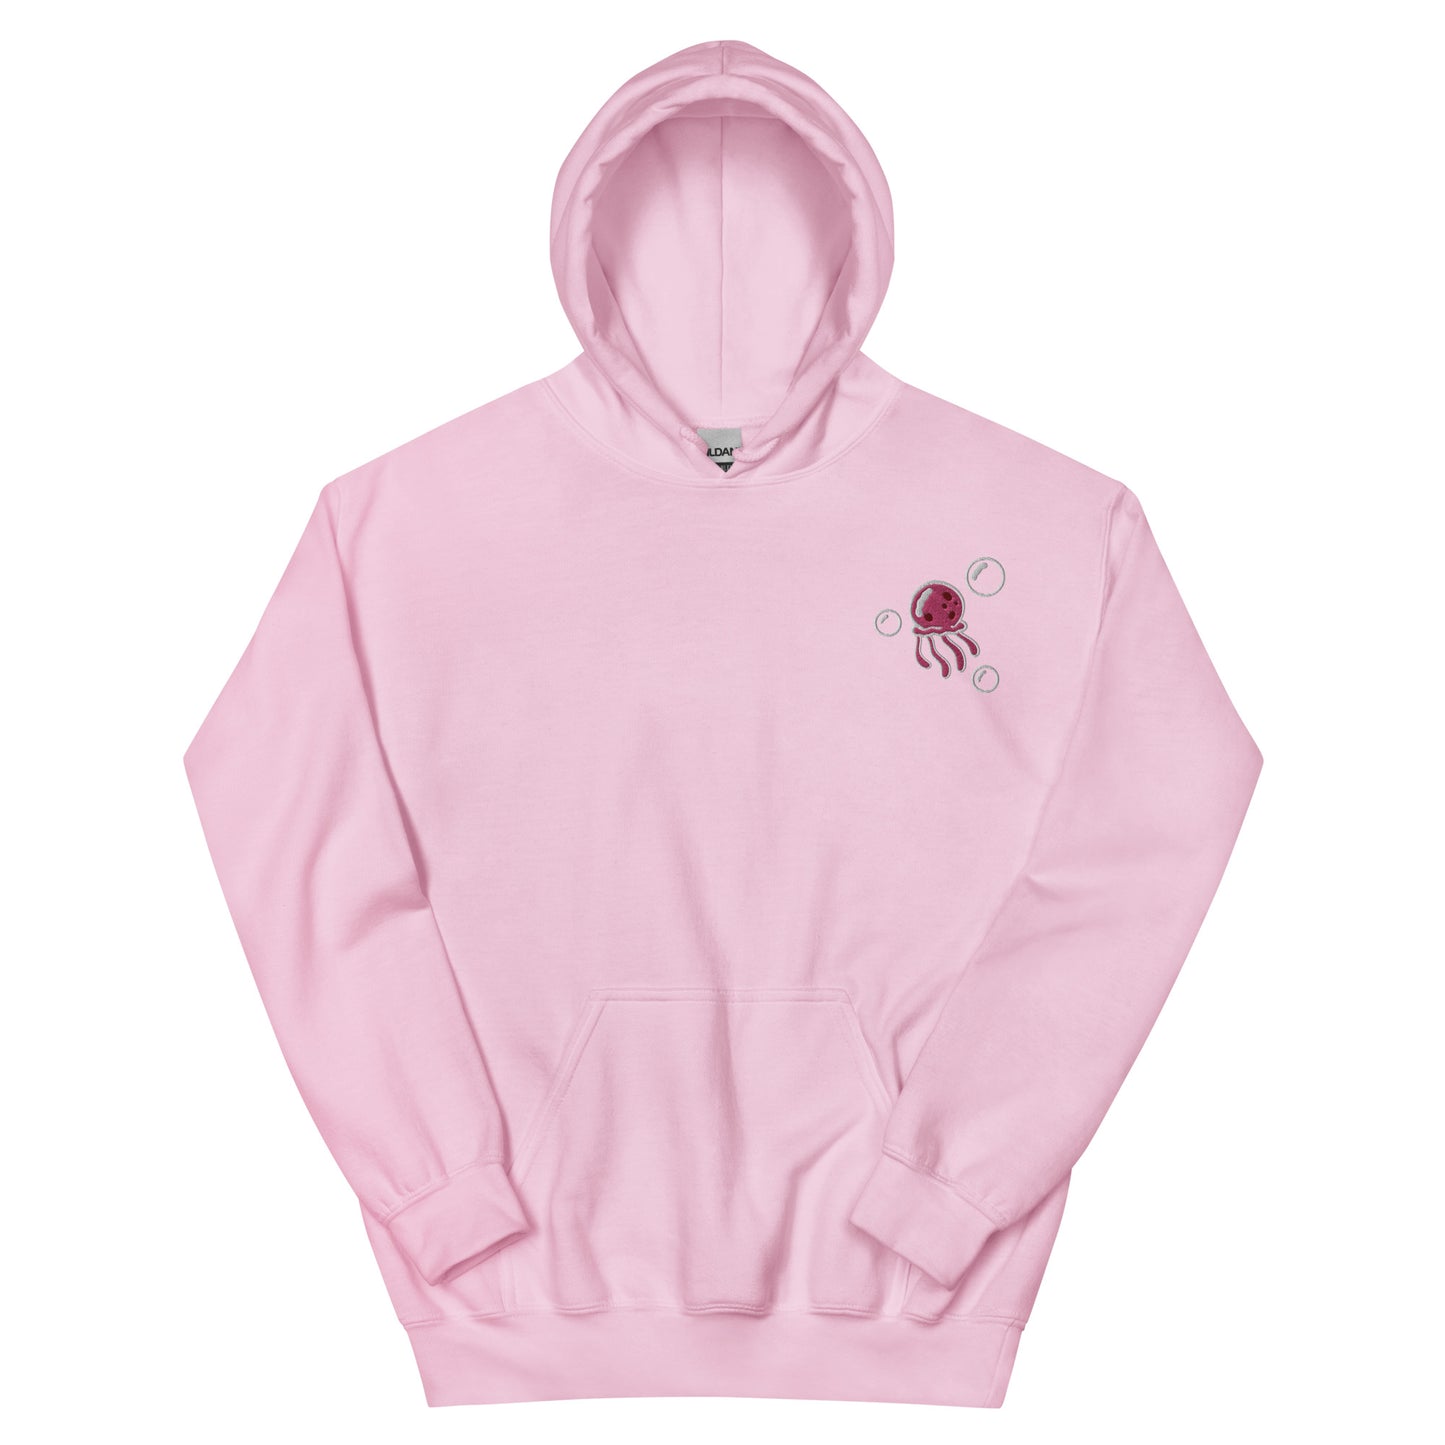 Jellyfish PINK embroidered pullover hoodie